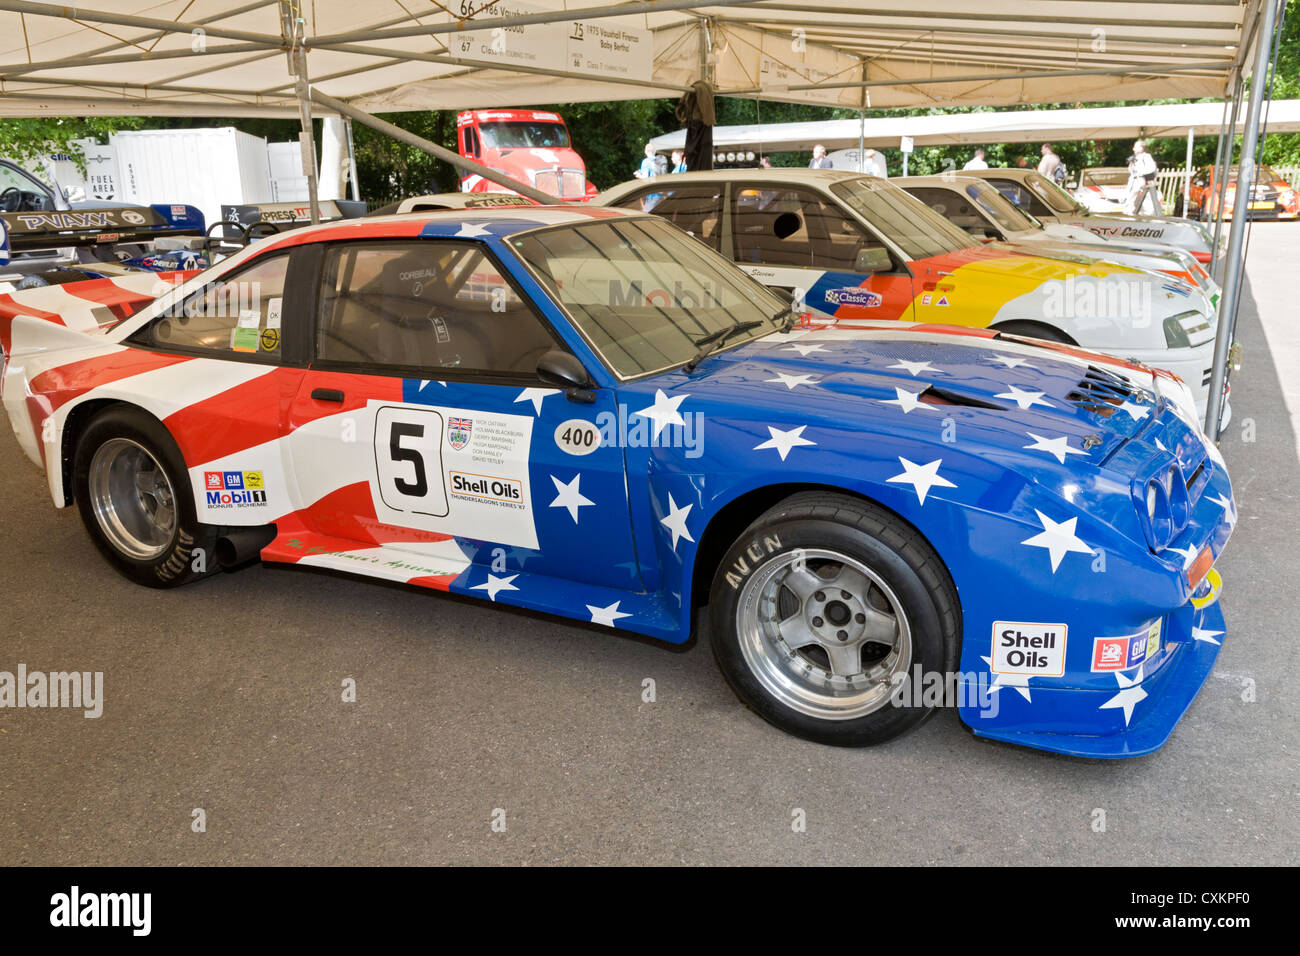 1986 Opel Manta 400 « Stars & Stripes' thundersaloon dans le paddock au Goodwood Festival of Speed 2012, Sussex, UK. Banque D'Images